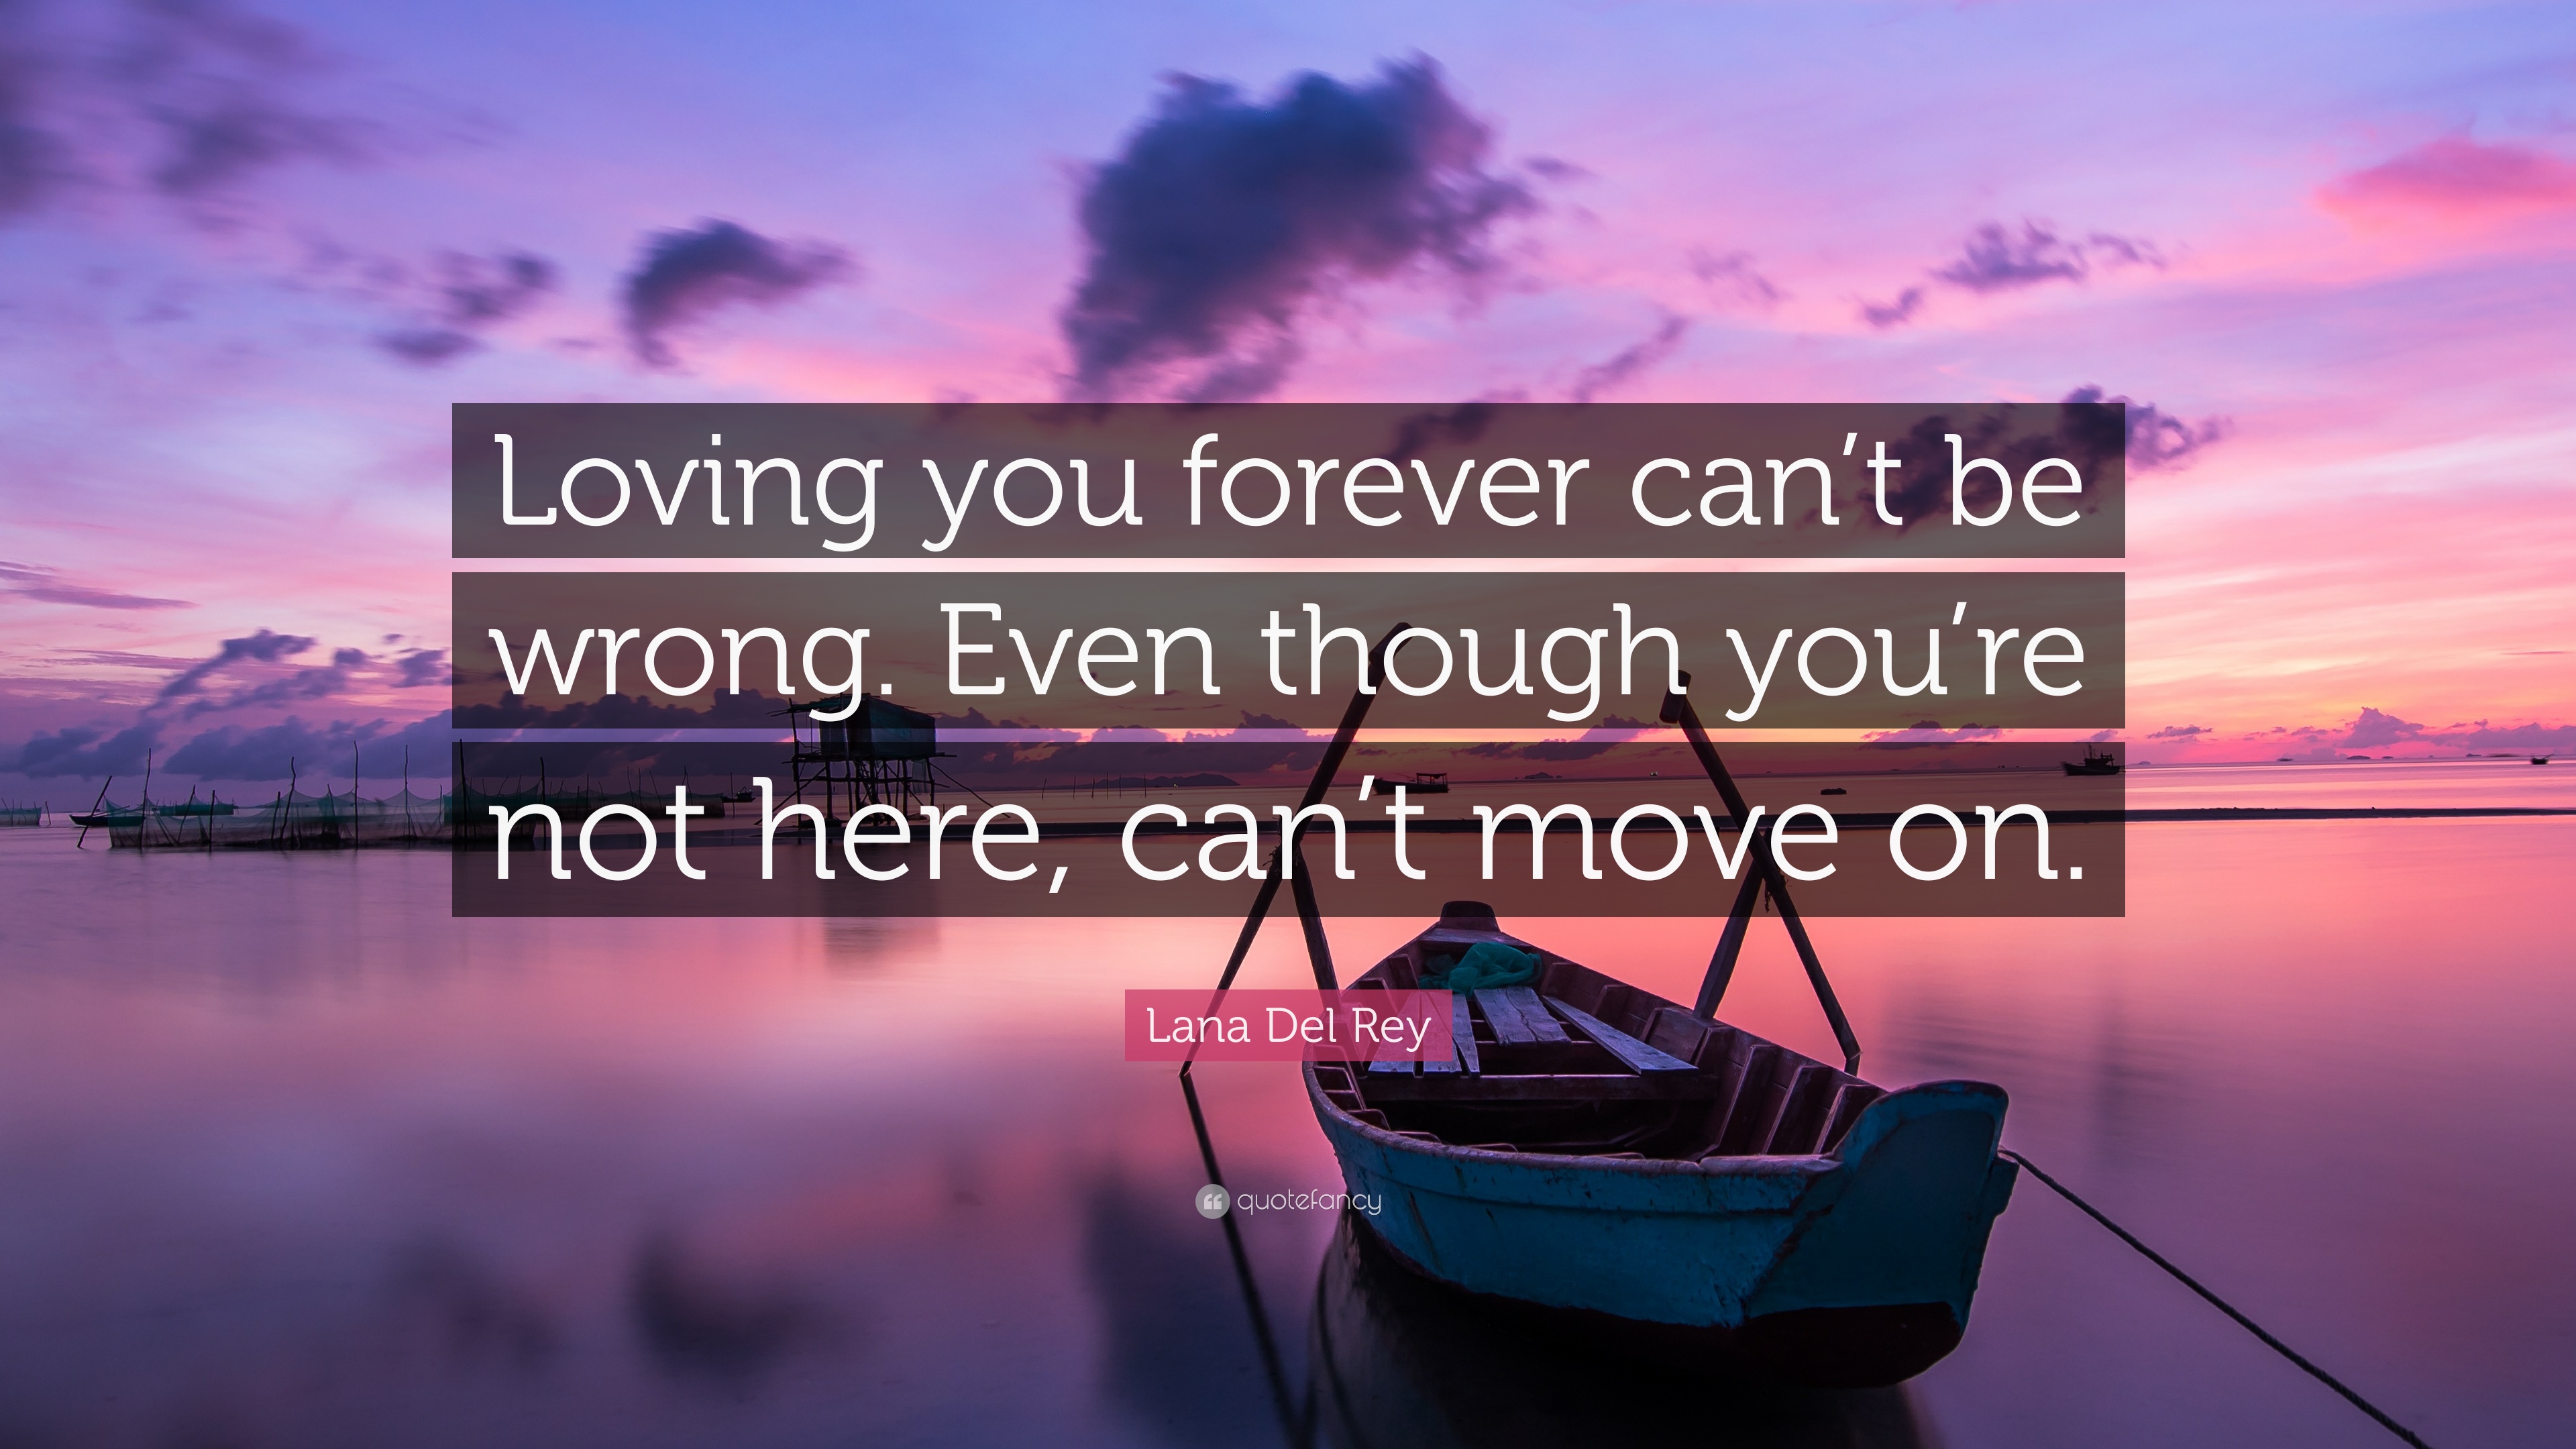 Lana Del Rey Quote: “Loving you forever can't be wrong. Even though ...